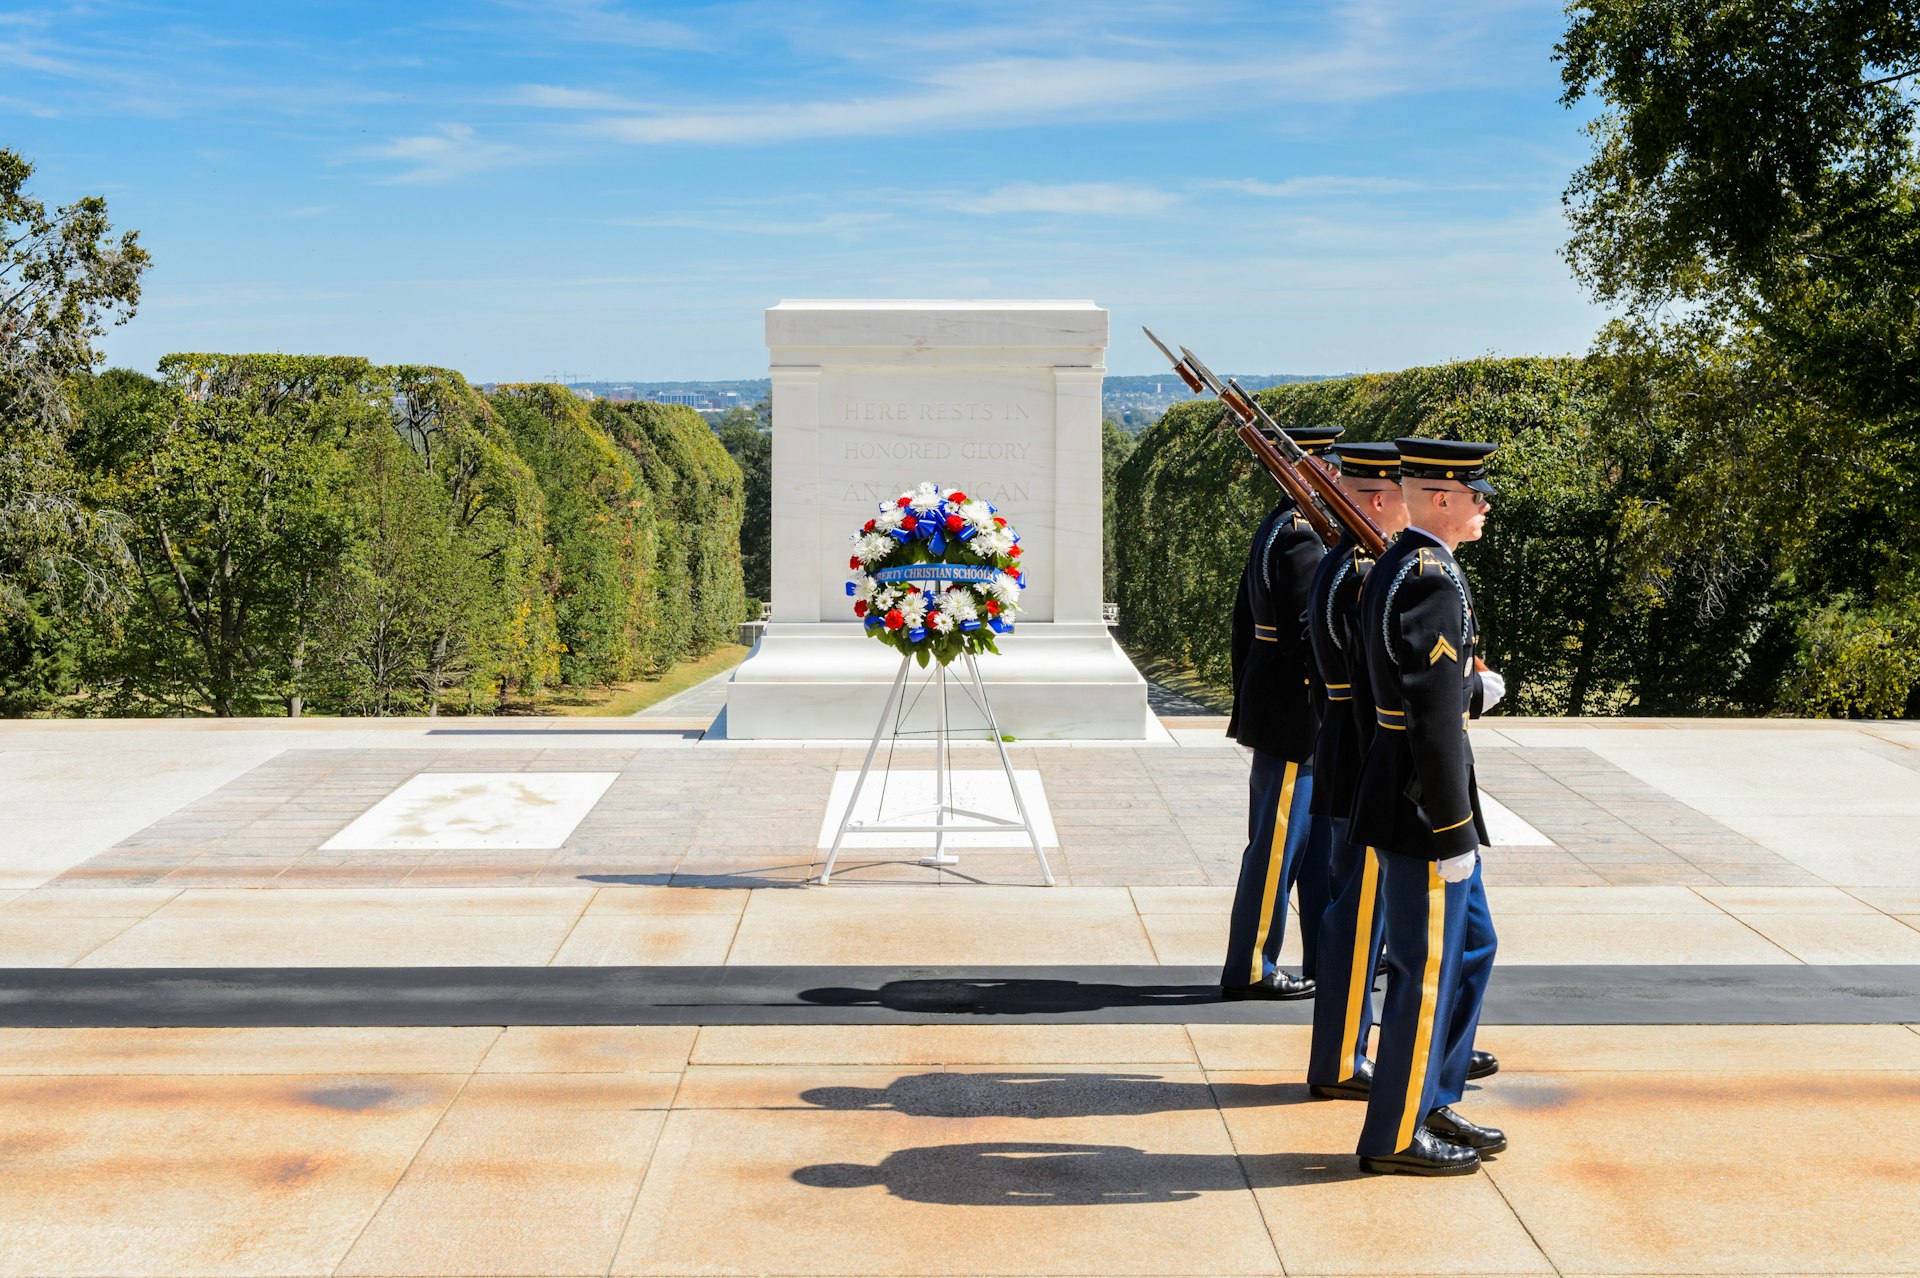 Changing of the guard near the Tomb of the Unknown Soldier at Arlington National Cemetery